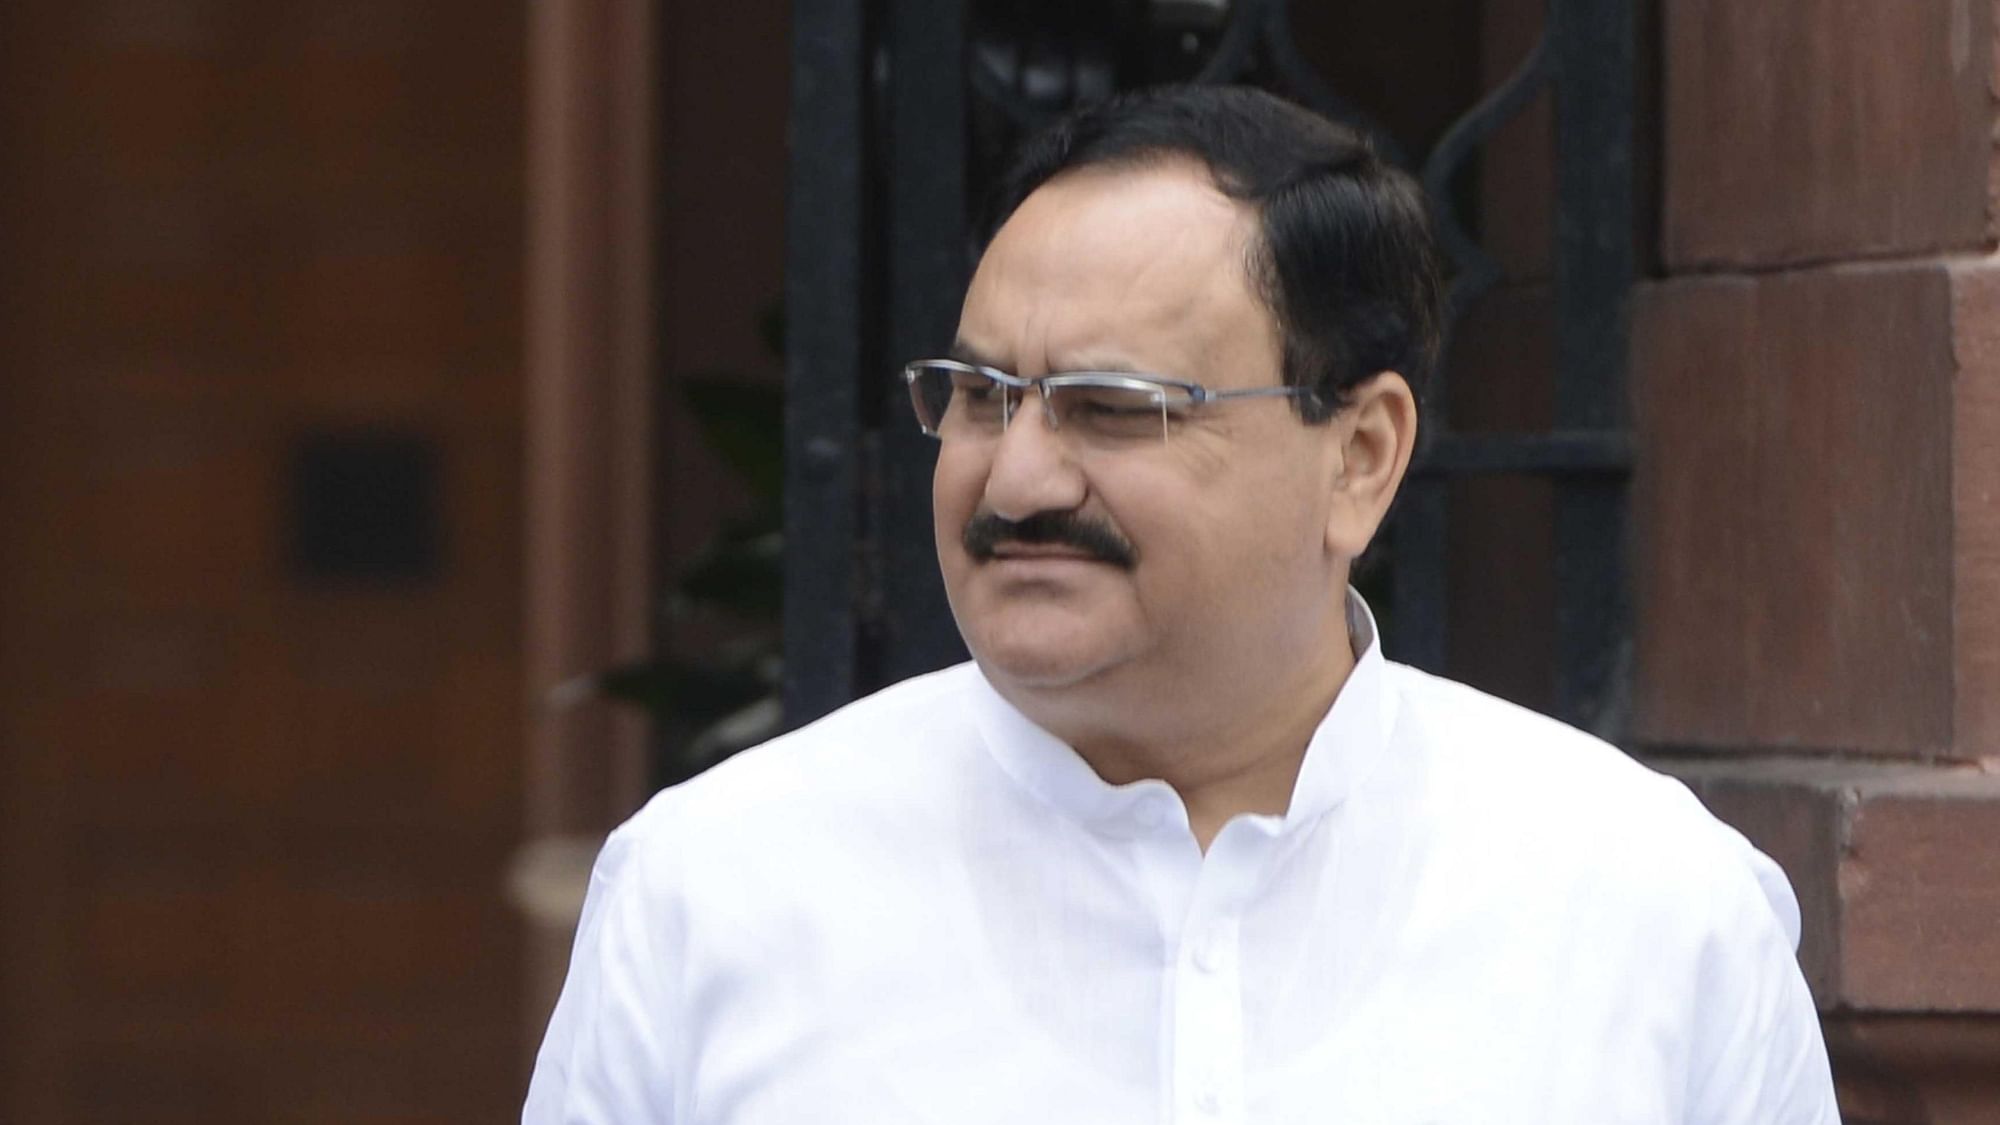 The Bill was introduced on 14 December in the Lok Sabha by Union Health and Family Welfare Minister JP Nadda.